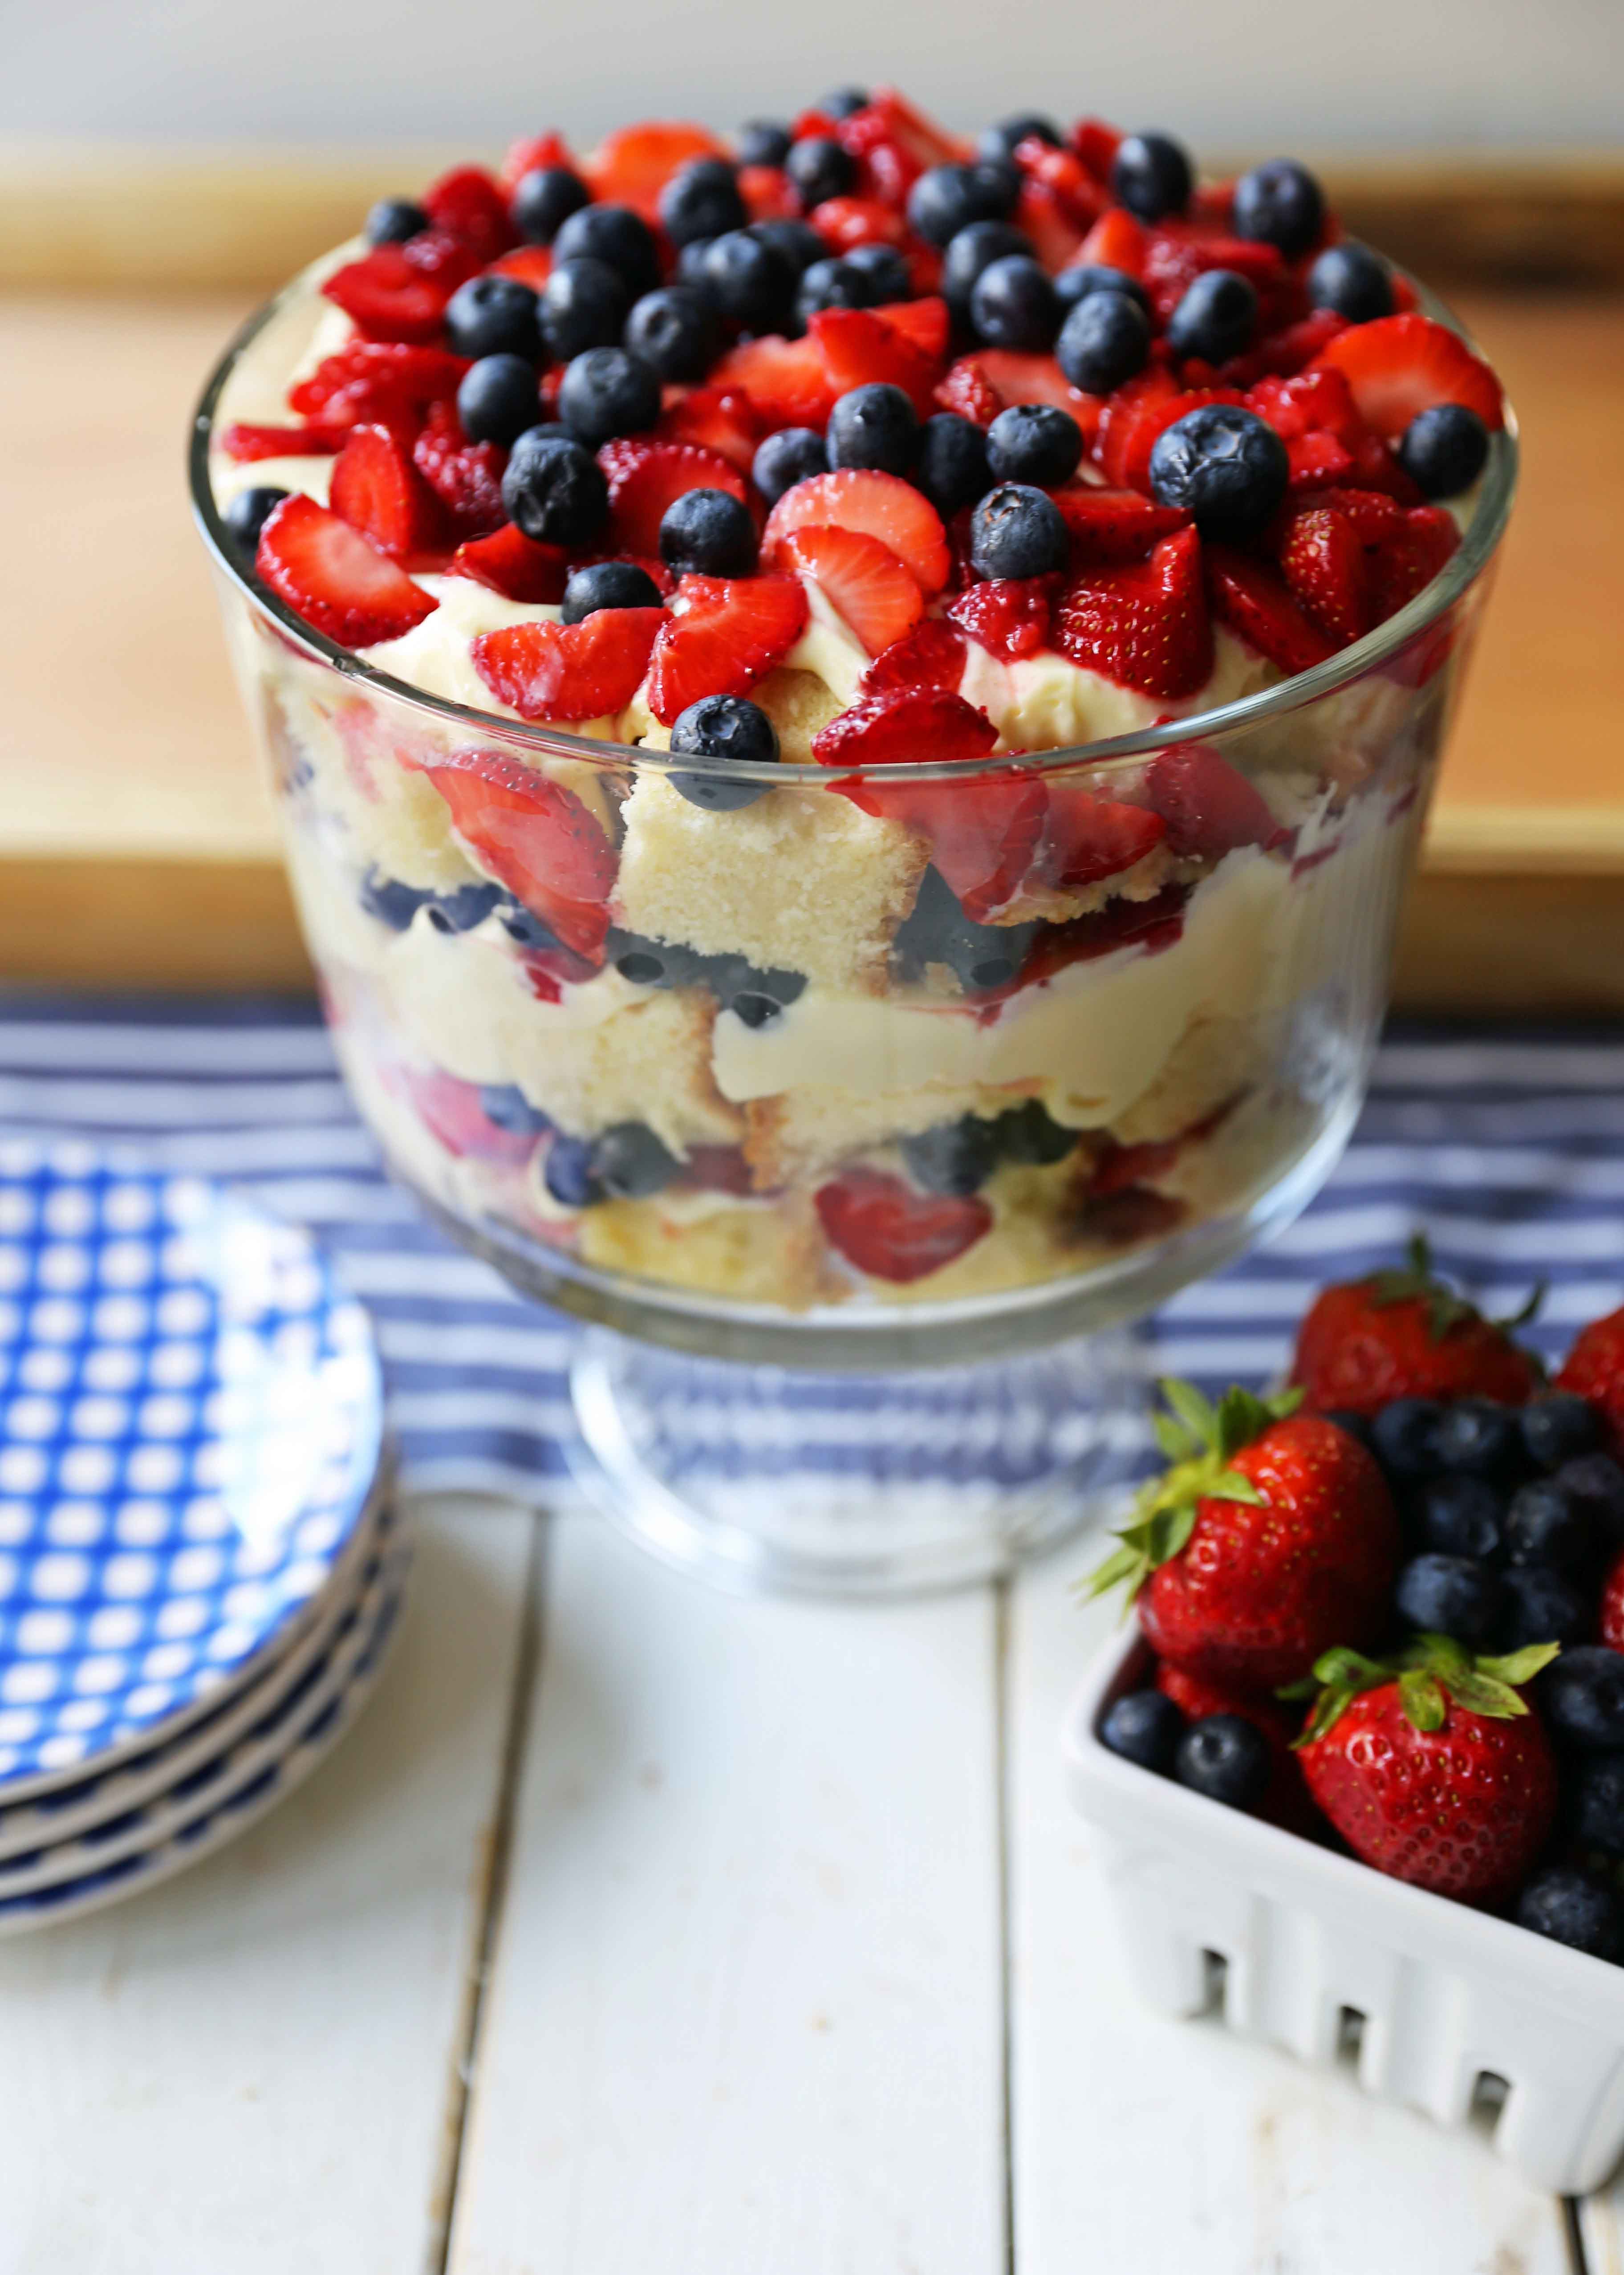 Summer Berry Trifle made with homemade cream cheese pound cake, creamy custard filling, and sweet fruit. A gorgeous summer dessert! Perfect dessert for a potluck and party. Patriotic 4th of July dessert. www.modernhoney.com #trifle #4thofJuly #patrioticdessert #trifle